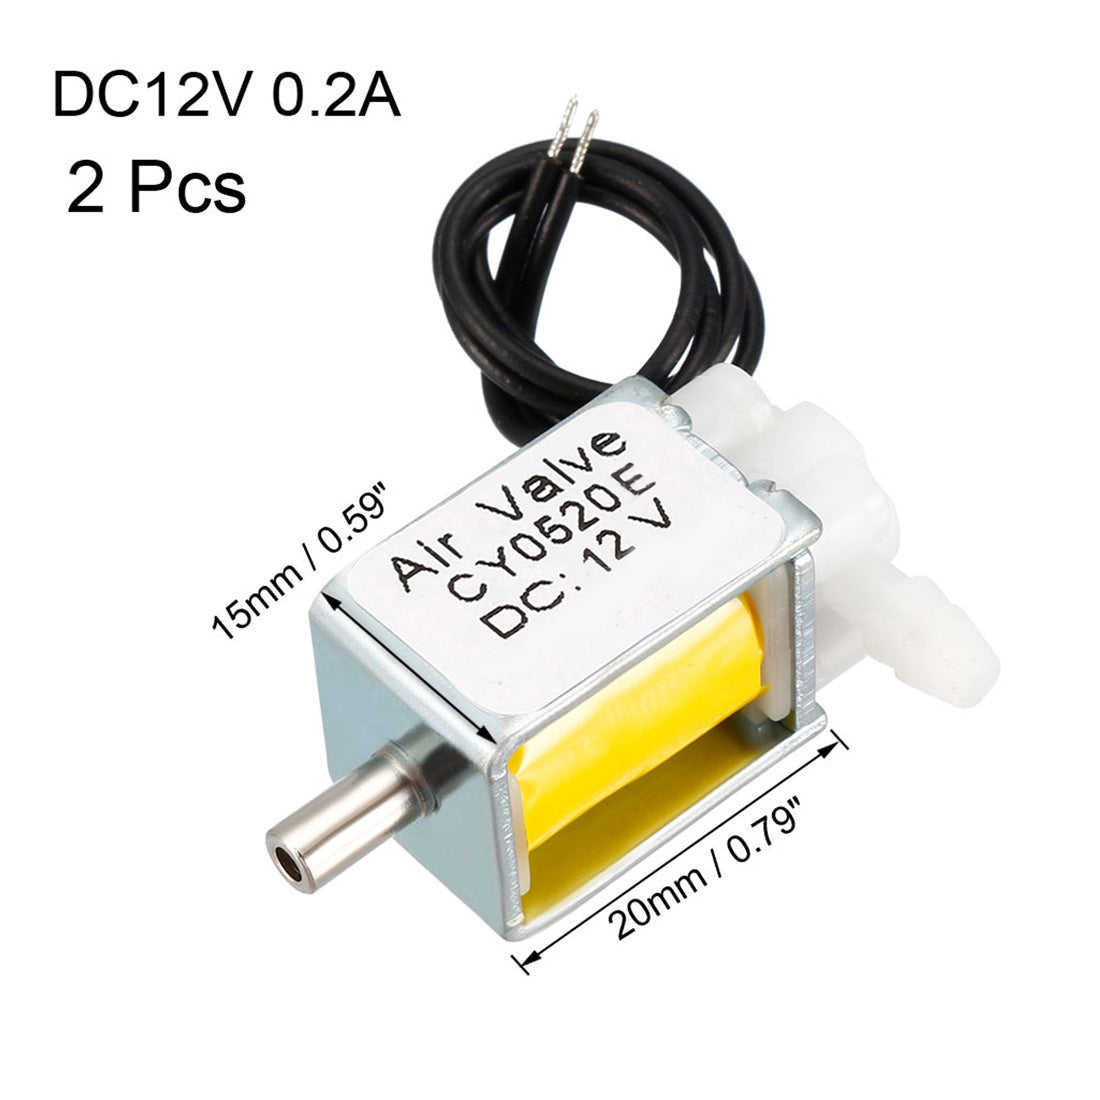 uxcell Uxcell Miniature Solenoid Valve 2 Position 3 Way DC 12V 0.2A Air Solenoid Valve, 2pcs